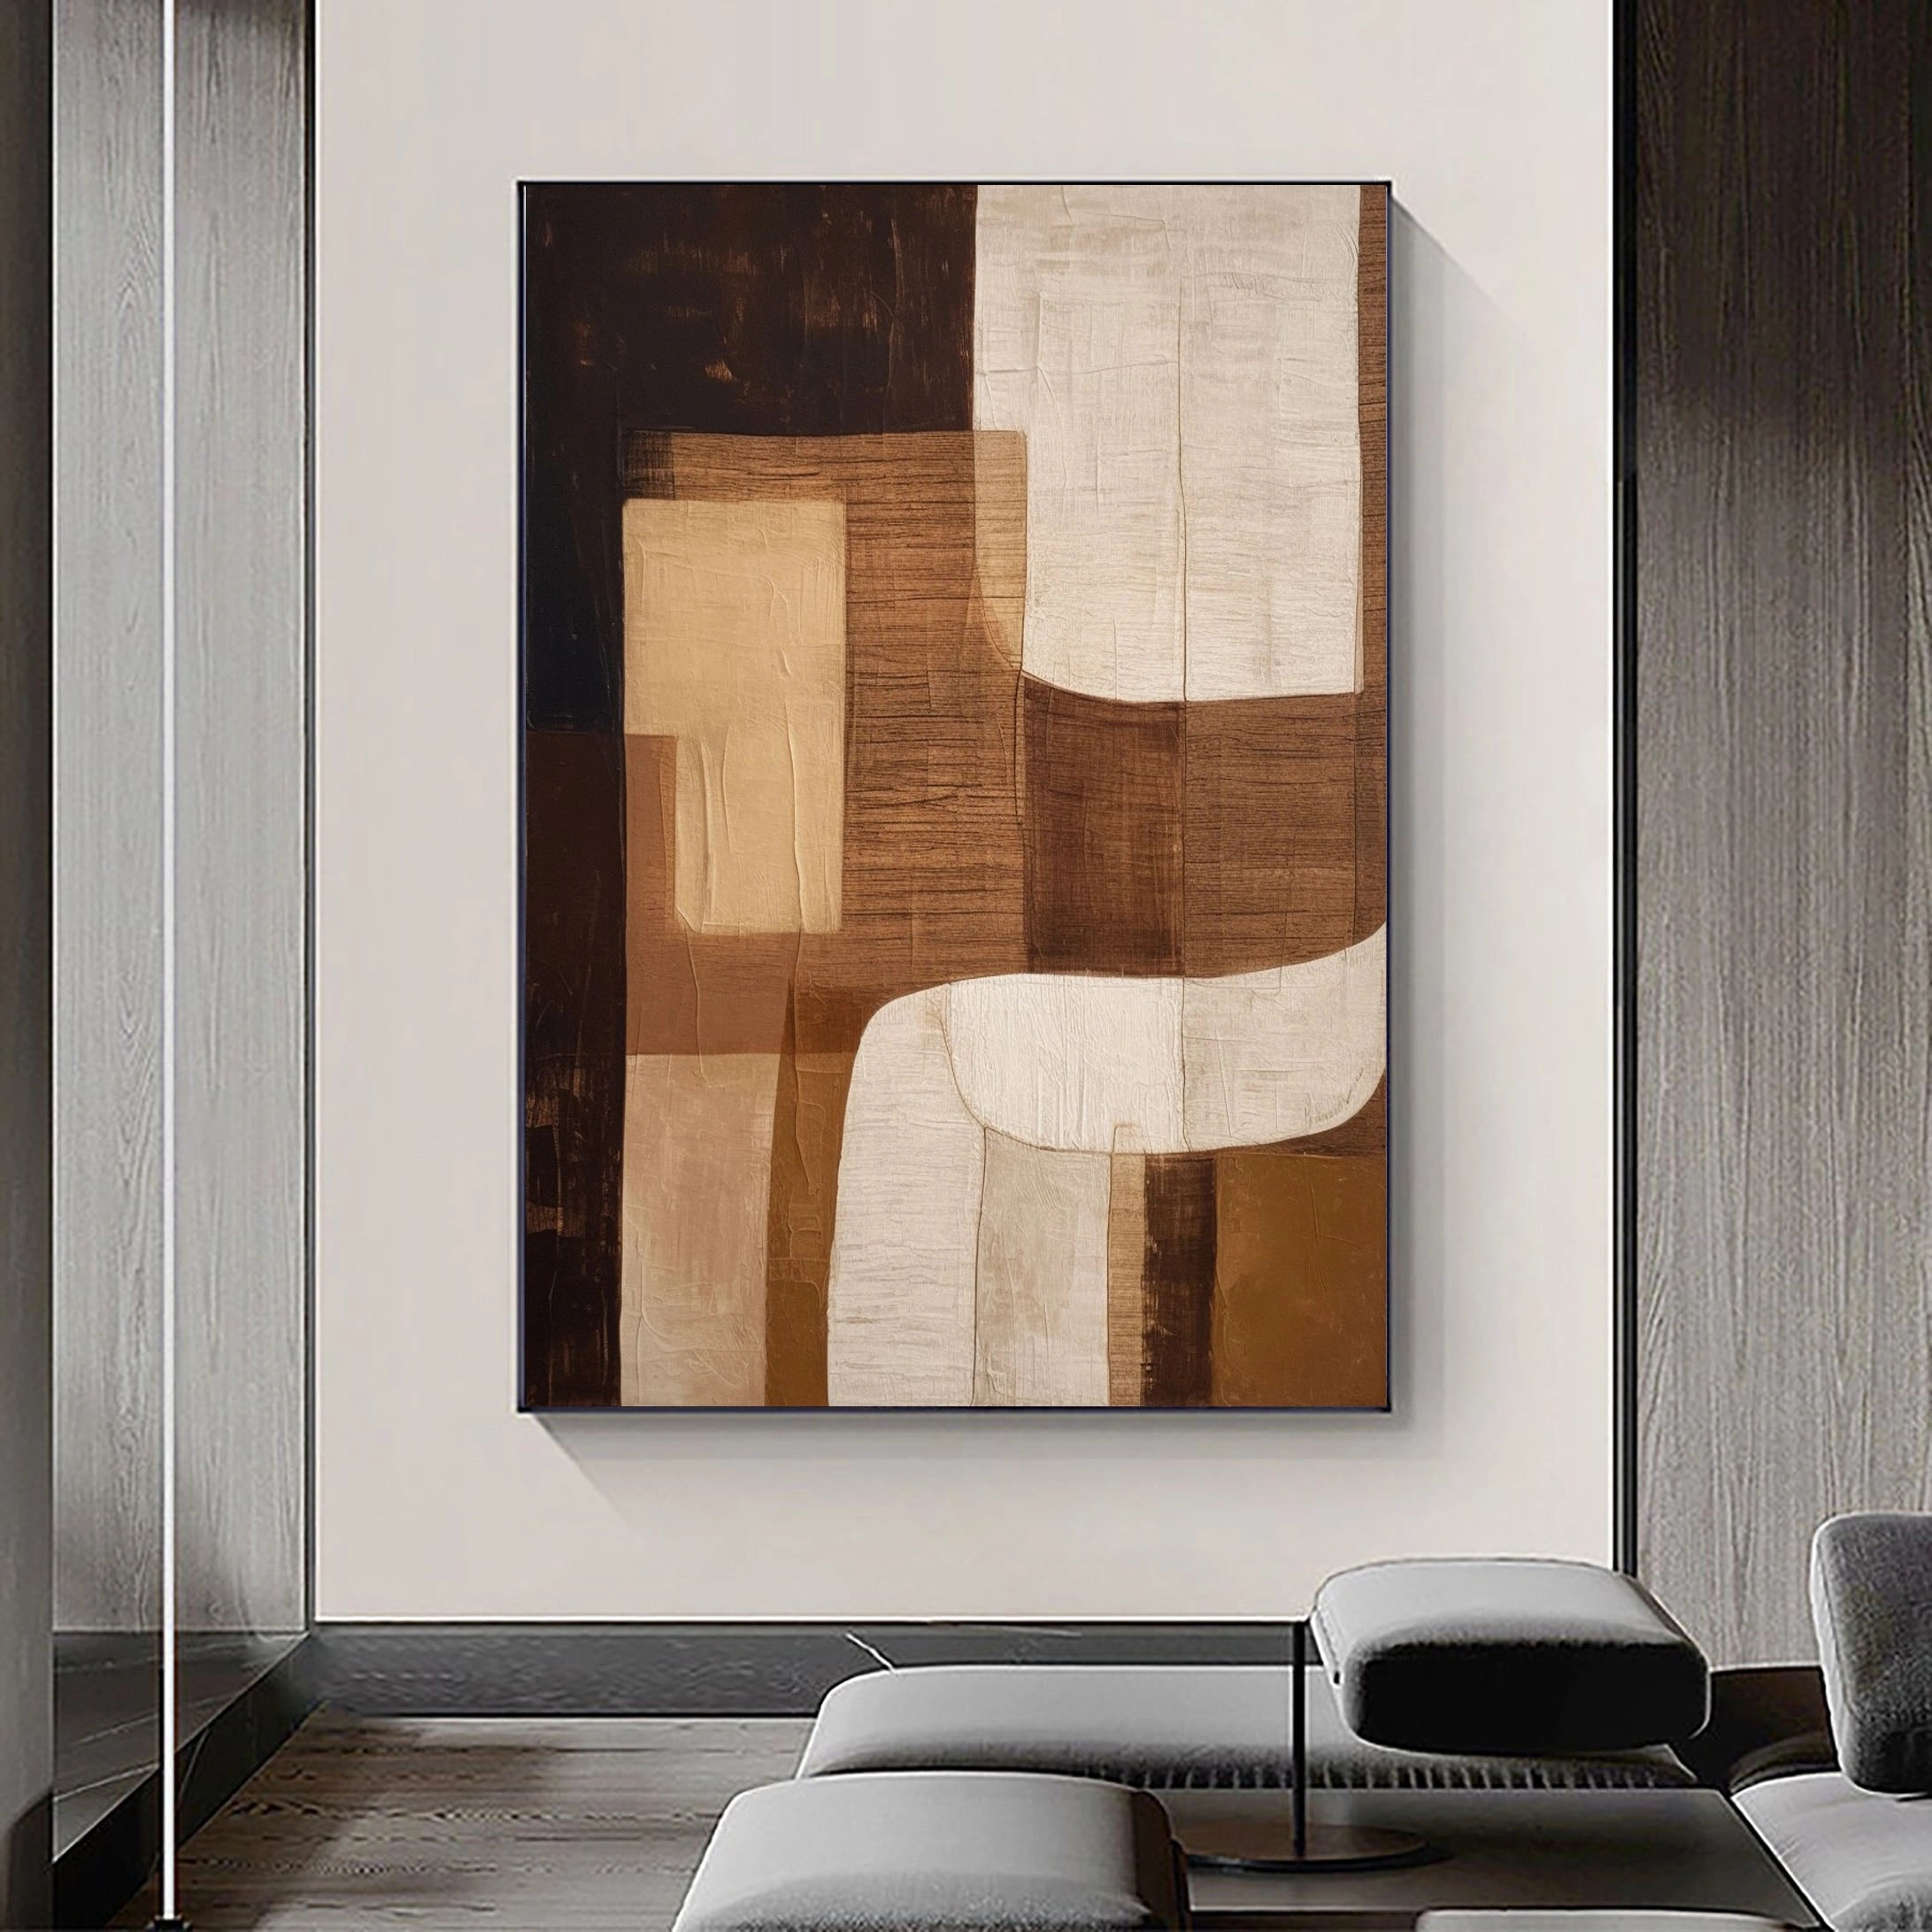 Eleanos Gallery Tan and Brown Wabi Sabi Big Canvas Abstract Wall Decor by Artist